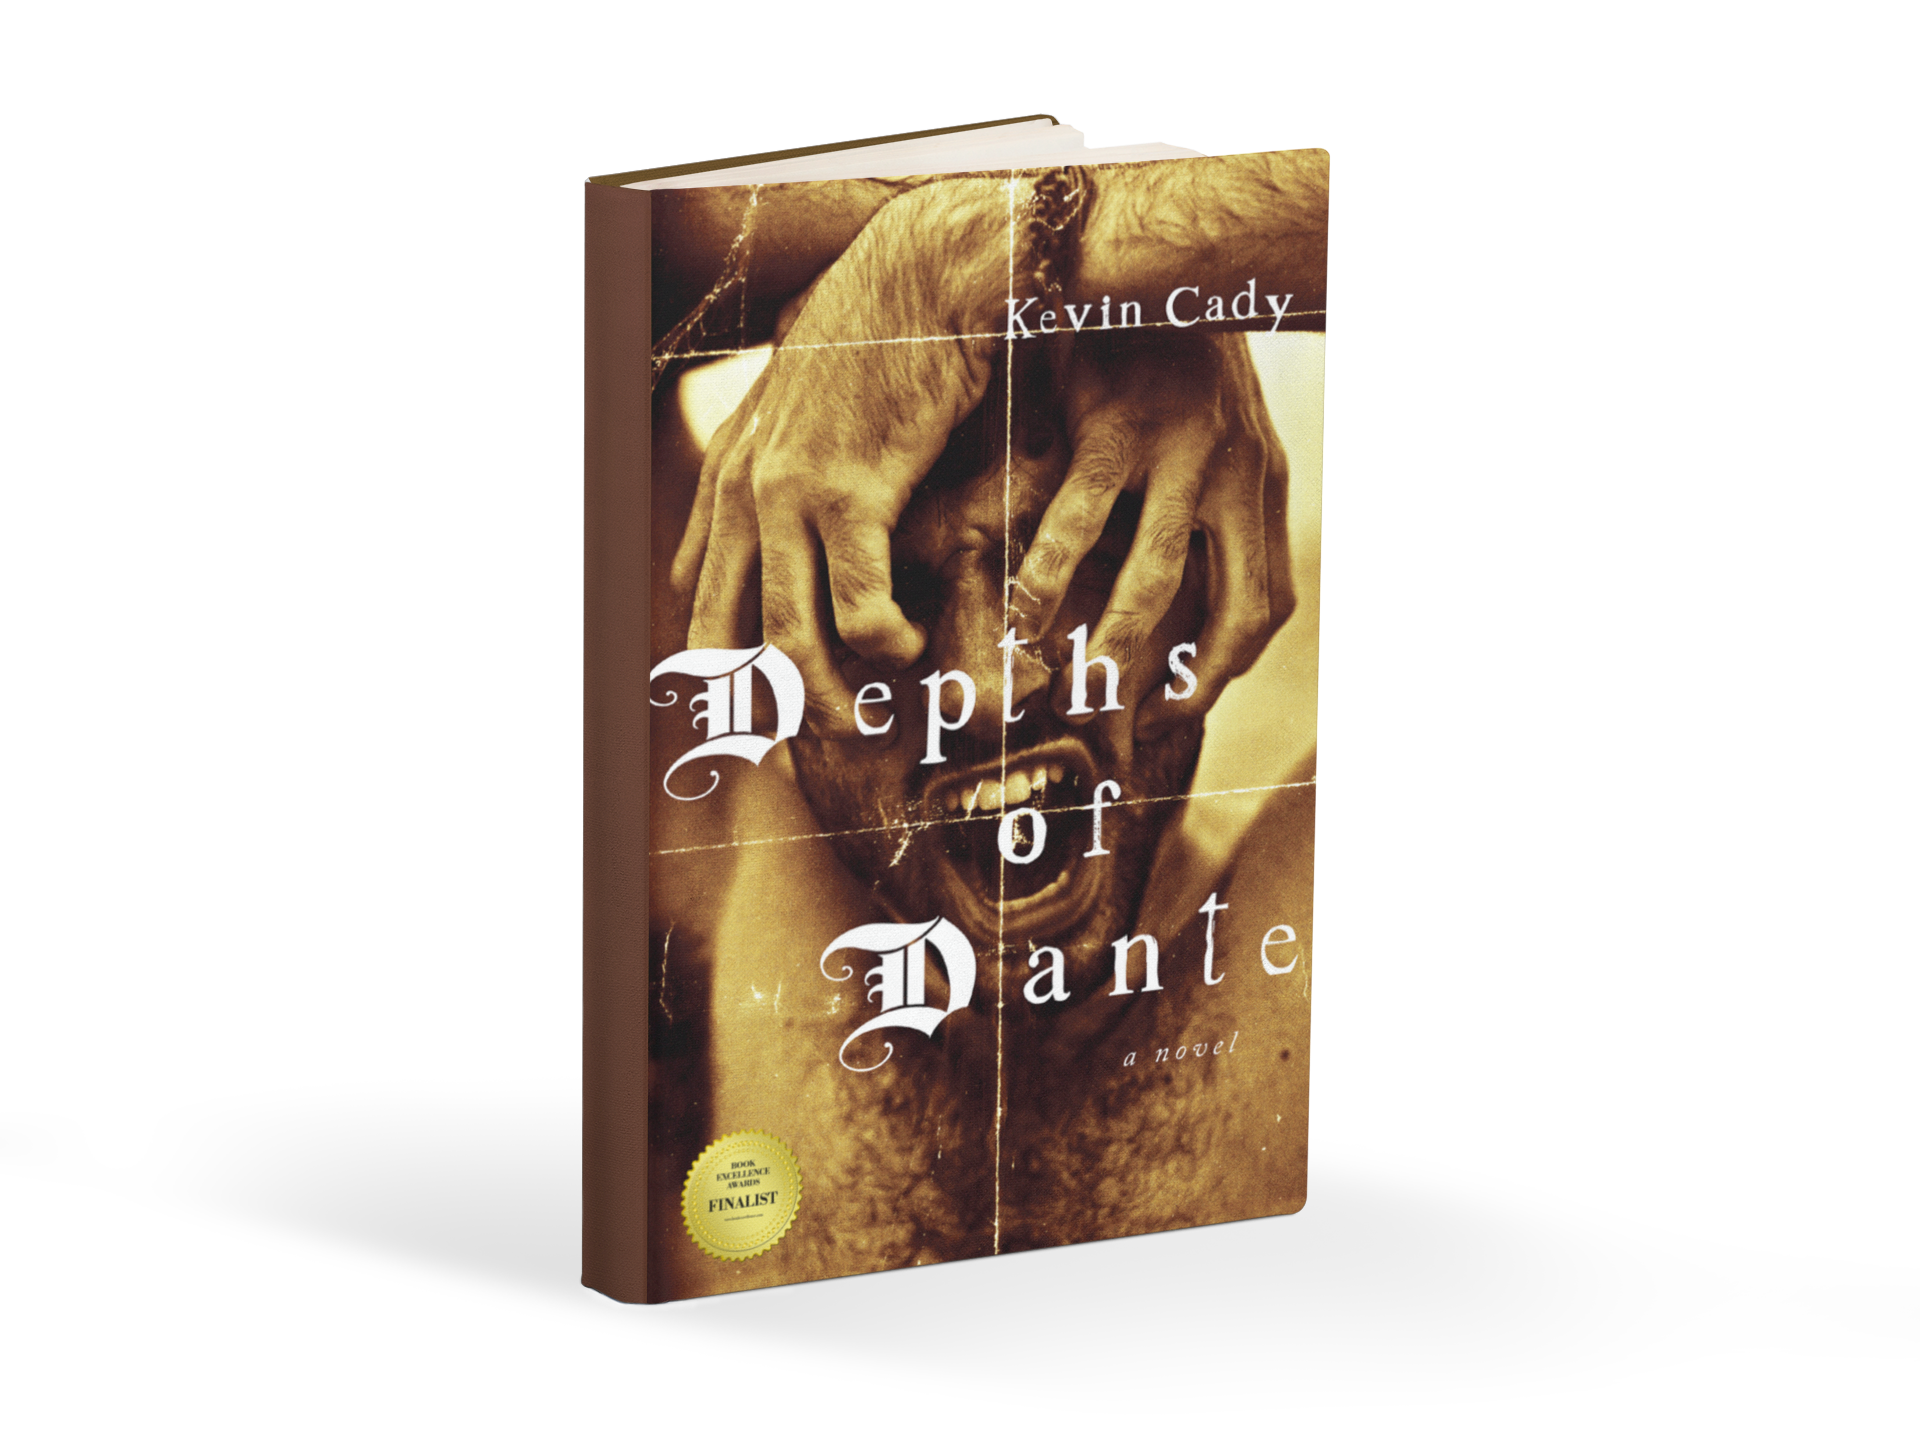 Kevin Cady’s, Depths of Dante: a novel, is Recognized as a Finalist in 2022 Top Book Award